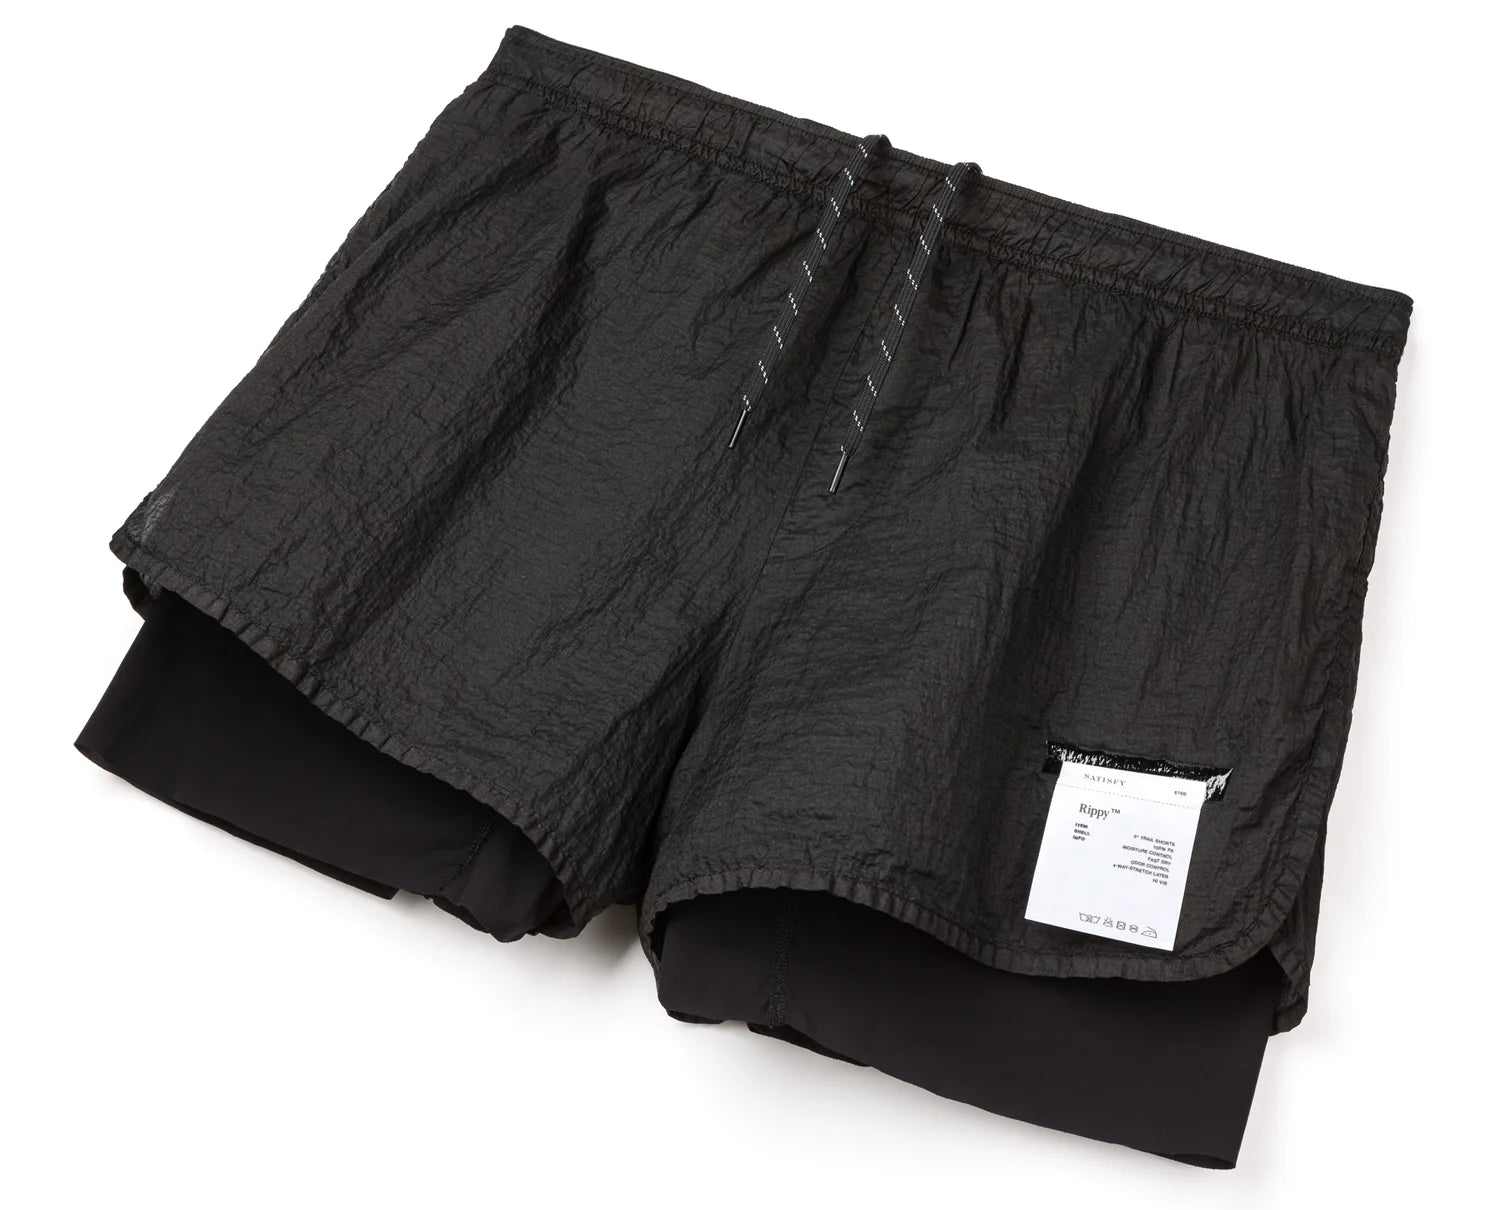 SATISFY - Rippy 3 Trail Shorts - Black - Space Camp